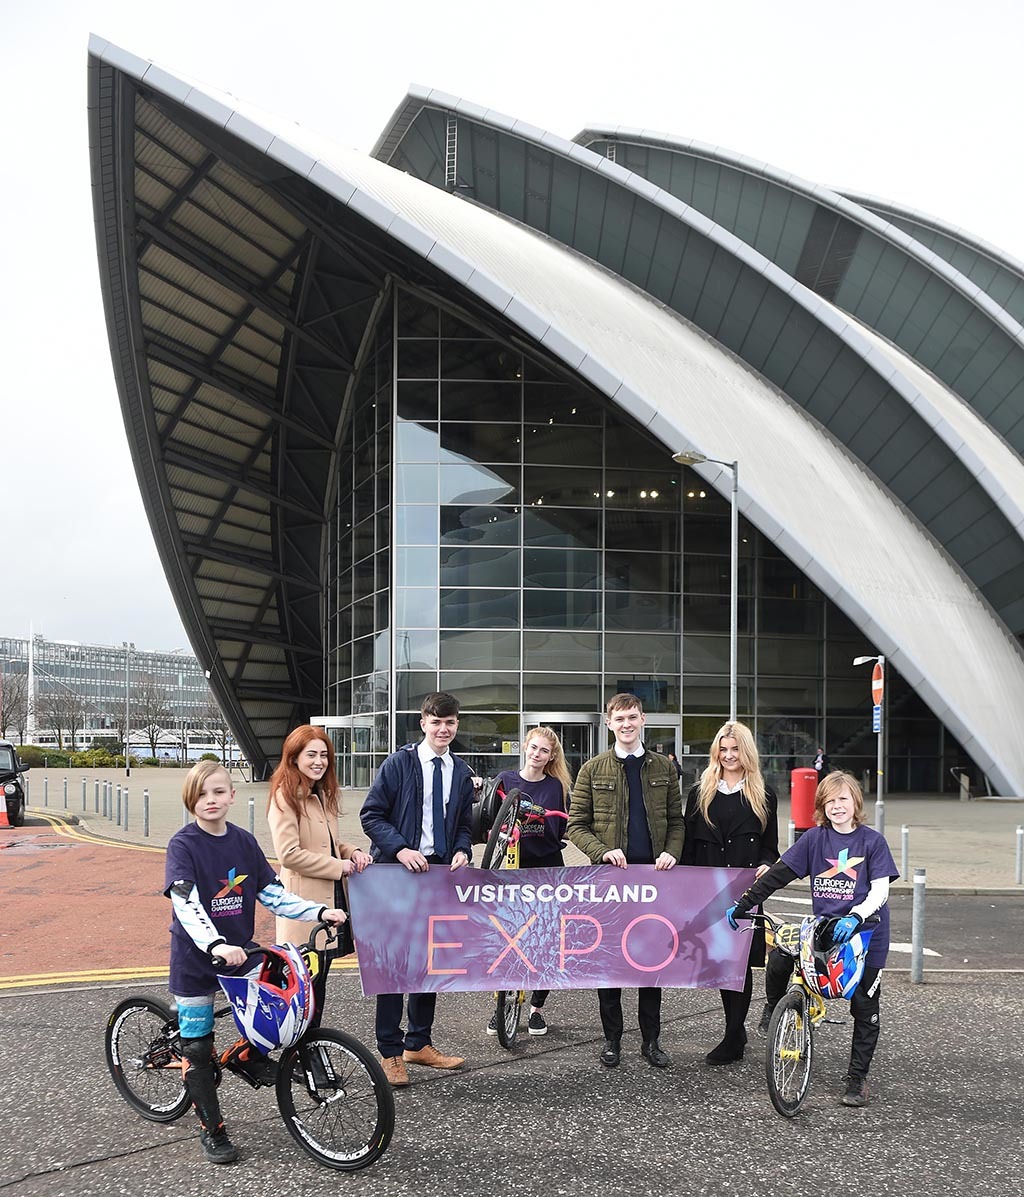 VisitScotland Expo is Scotland’s biggest business-to-business event for the travel trade